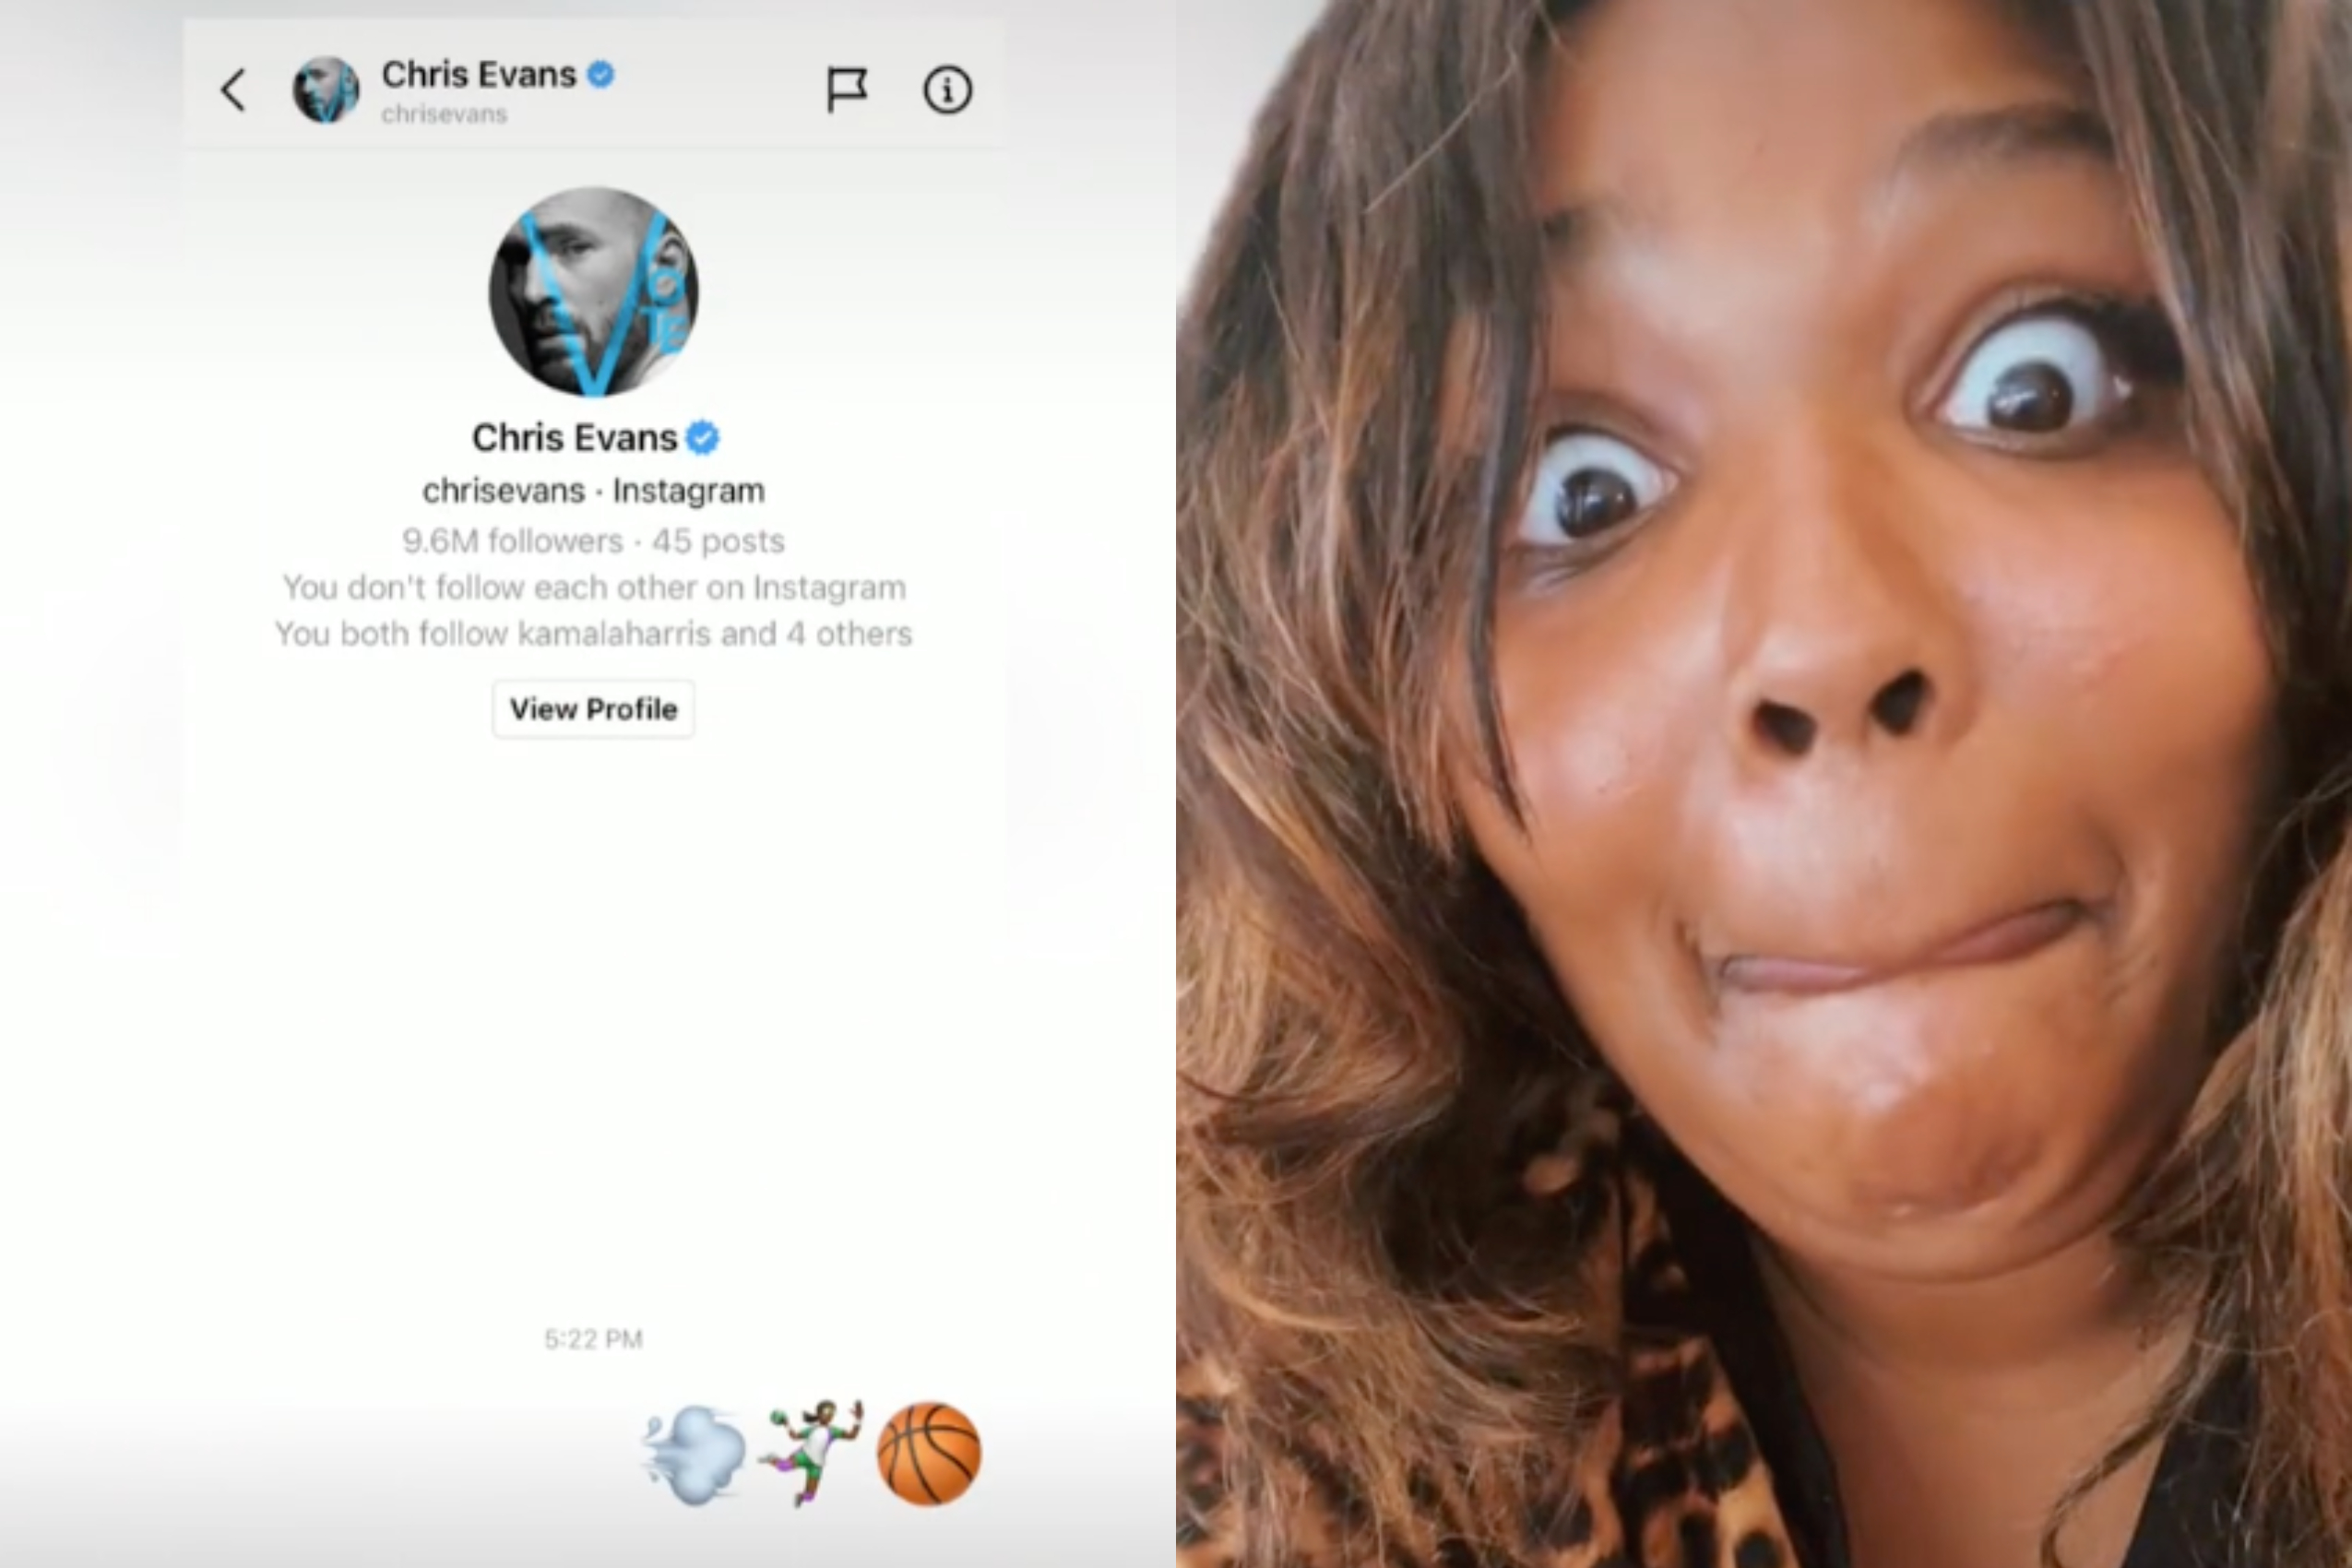 Lizzo Got Drunk & Slid Into Chris Evans’ DMs, Which Is Just A Regular Thursday Night For Me